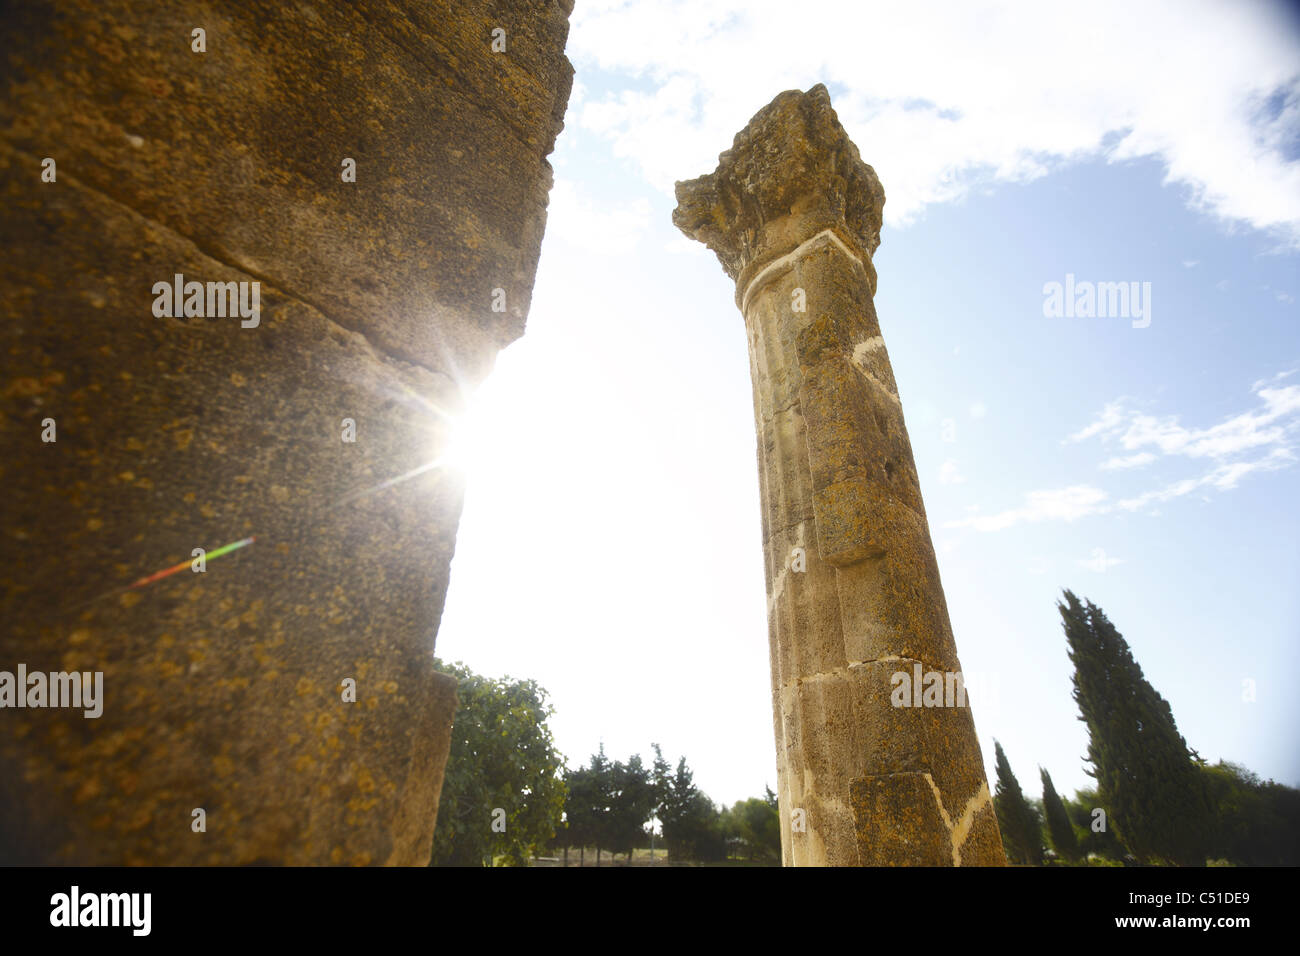 Africa, Tunisia, Ancient Punic and Roman Ruins at Utica Archaeological Site Stock Photo